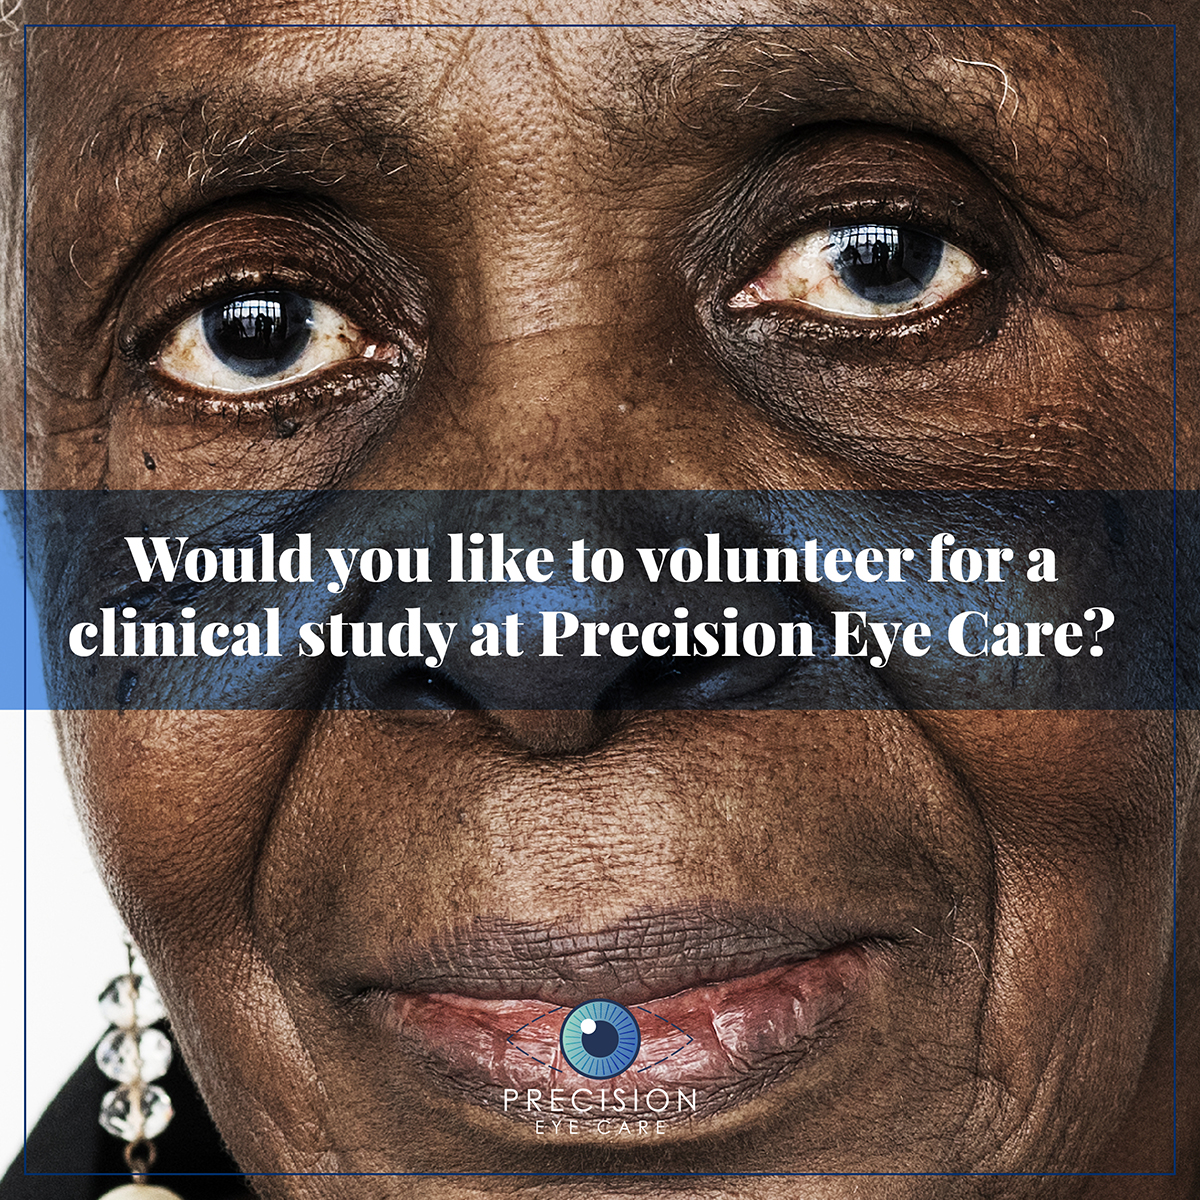 Would you like to volunteer for a clinical study at Precision Eye Care?